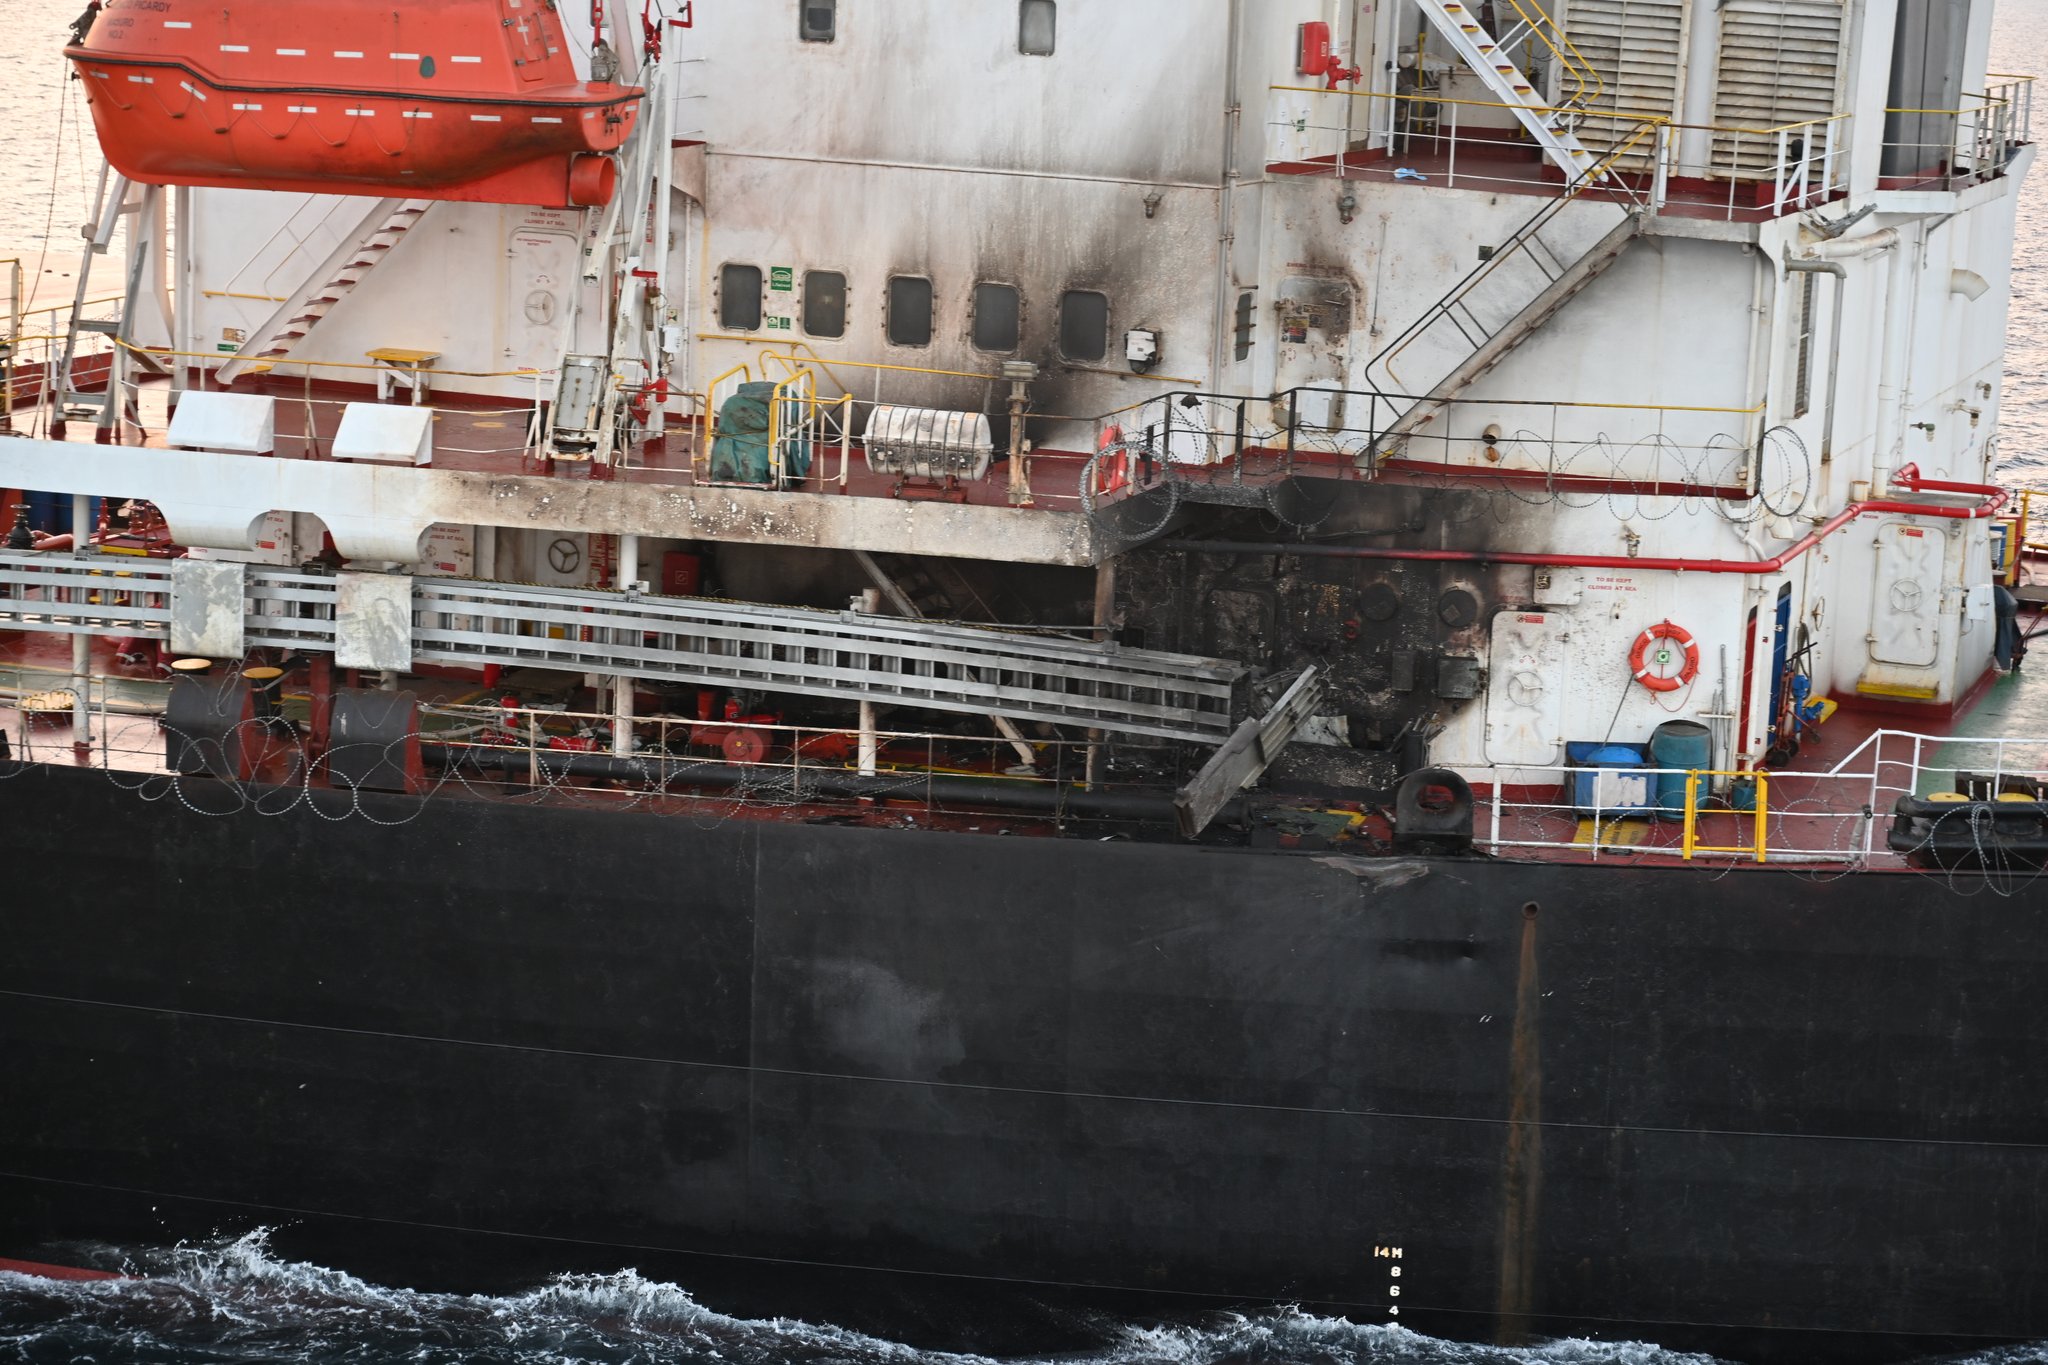 Dramatic images show Genco’s ship after Houthi attack in Gulf of Aden